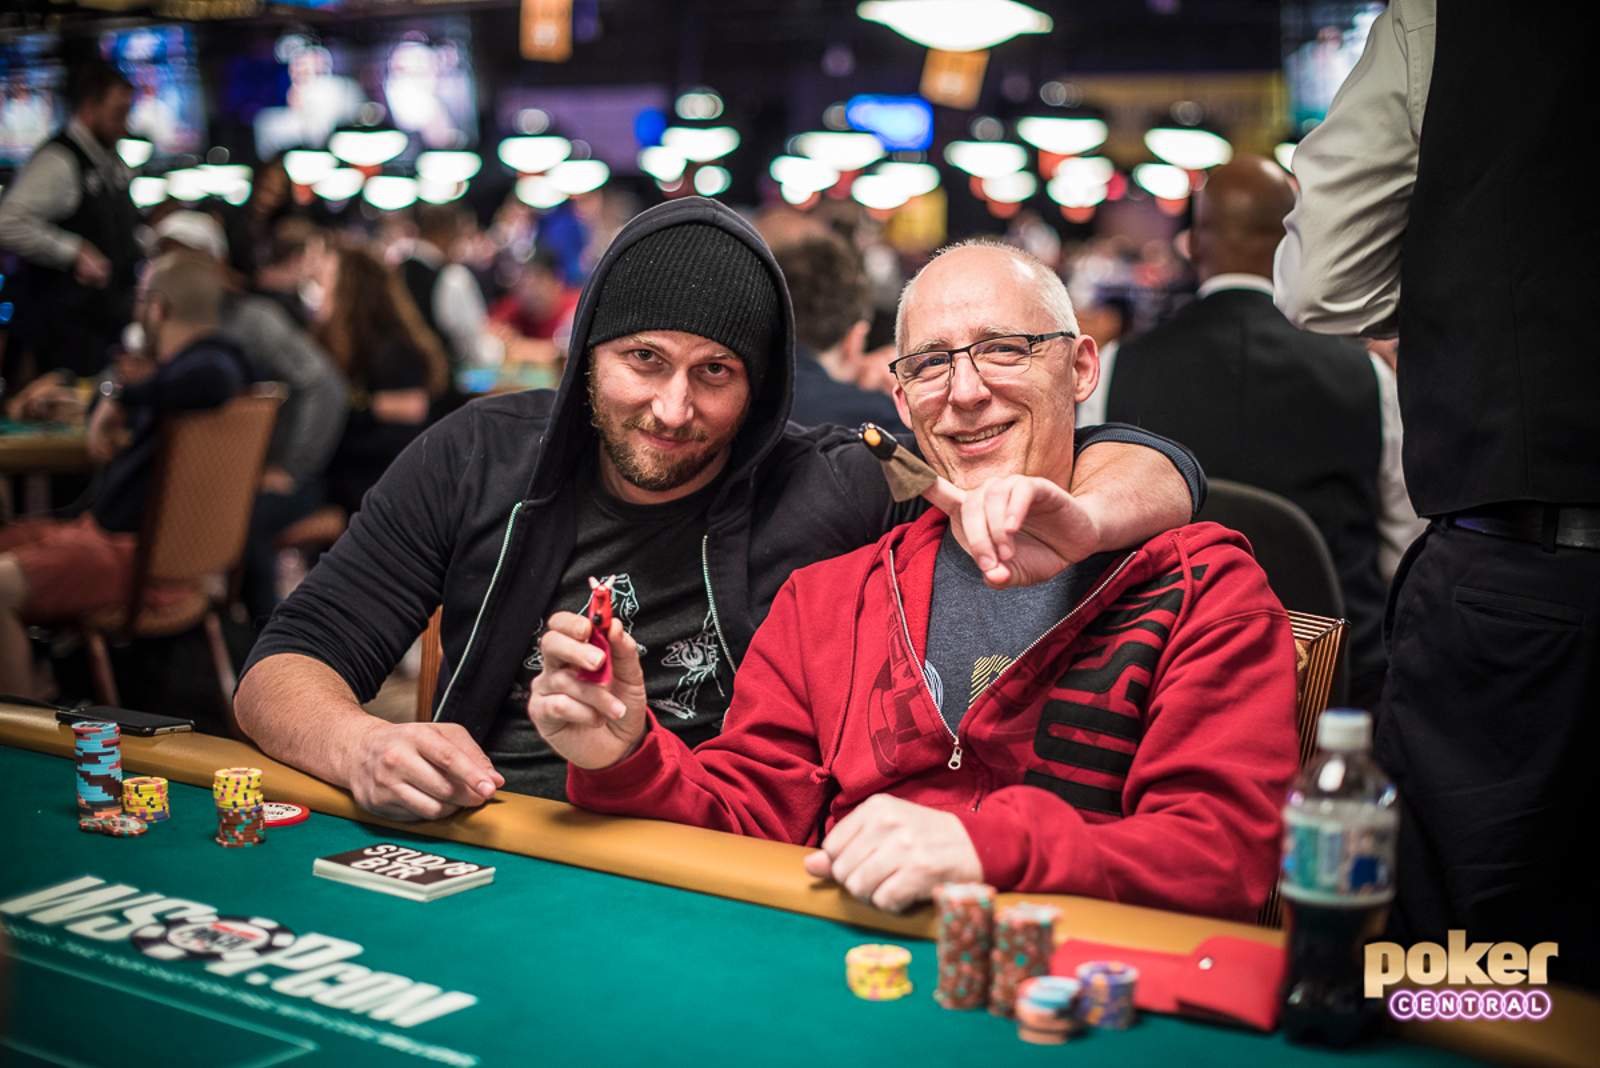 Through The Lens of Drew: The Poker Players Championship